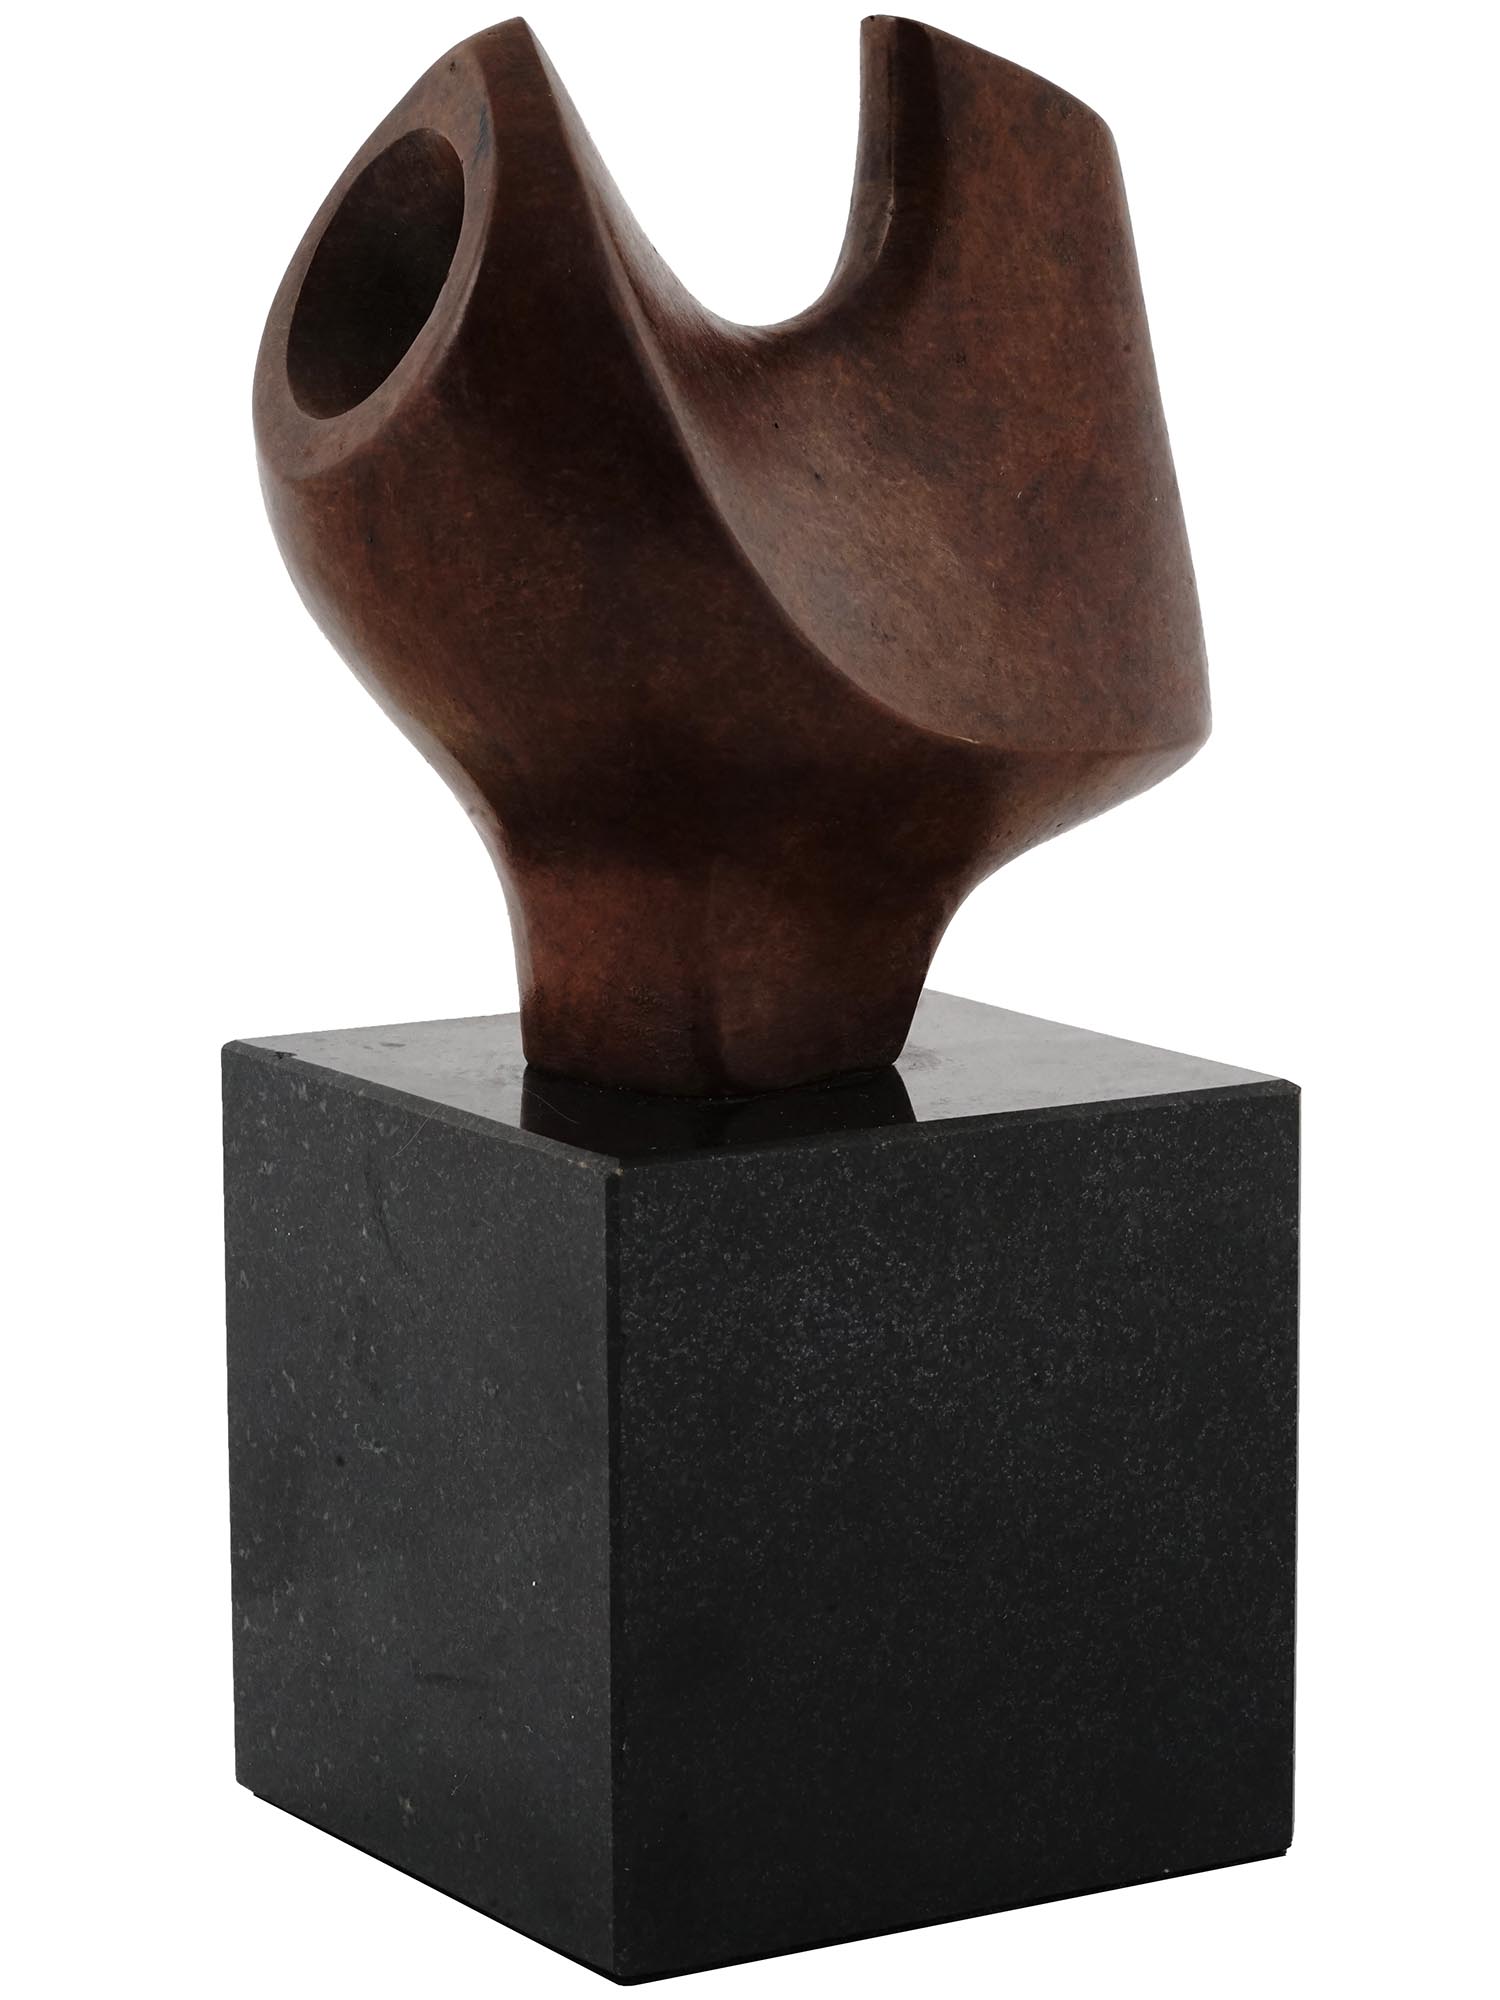 USA ABSTRACT BRONZE SCULPTURE BY GILBERT FRANKLIN PIC-0